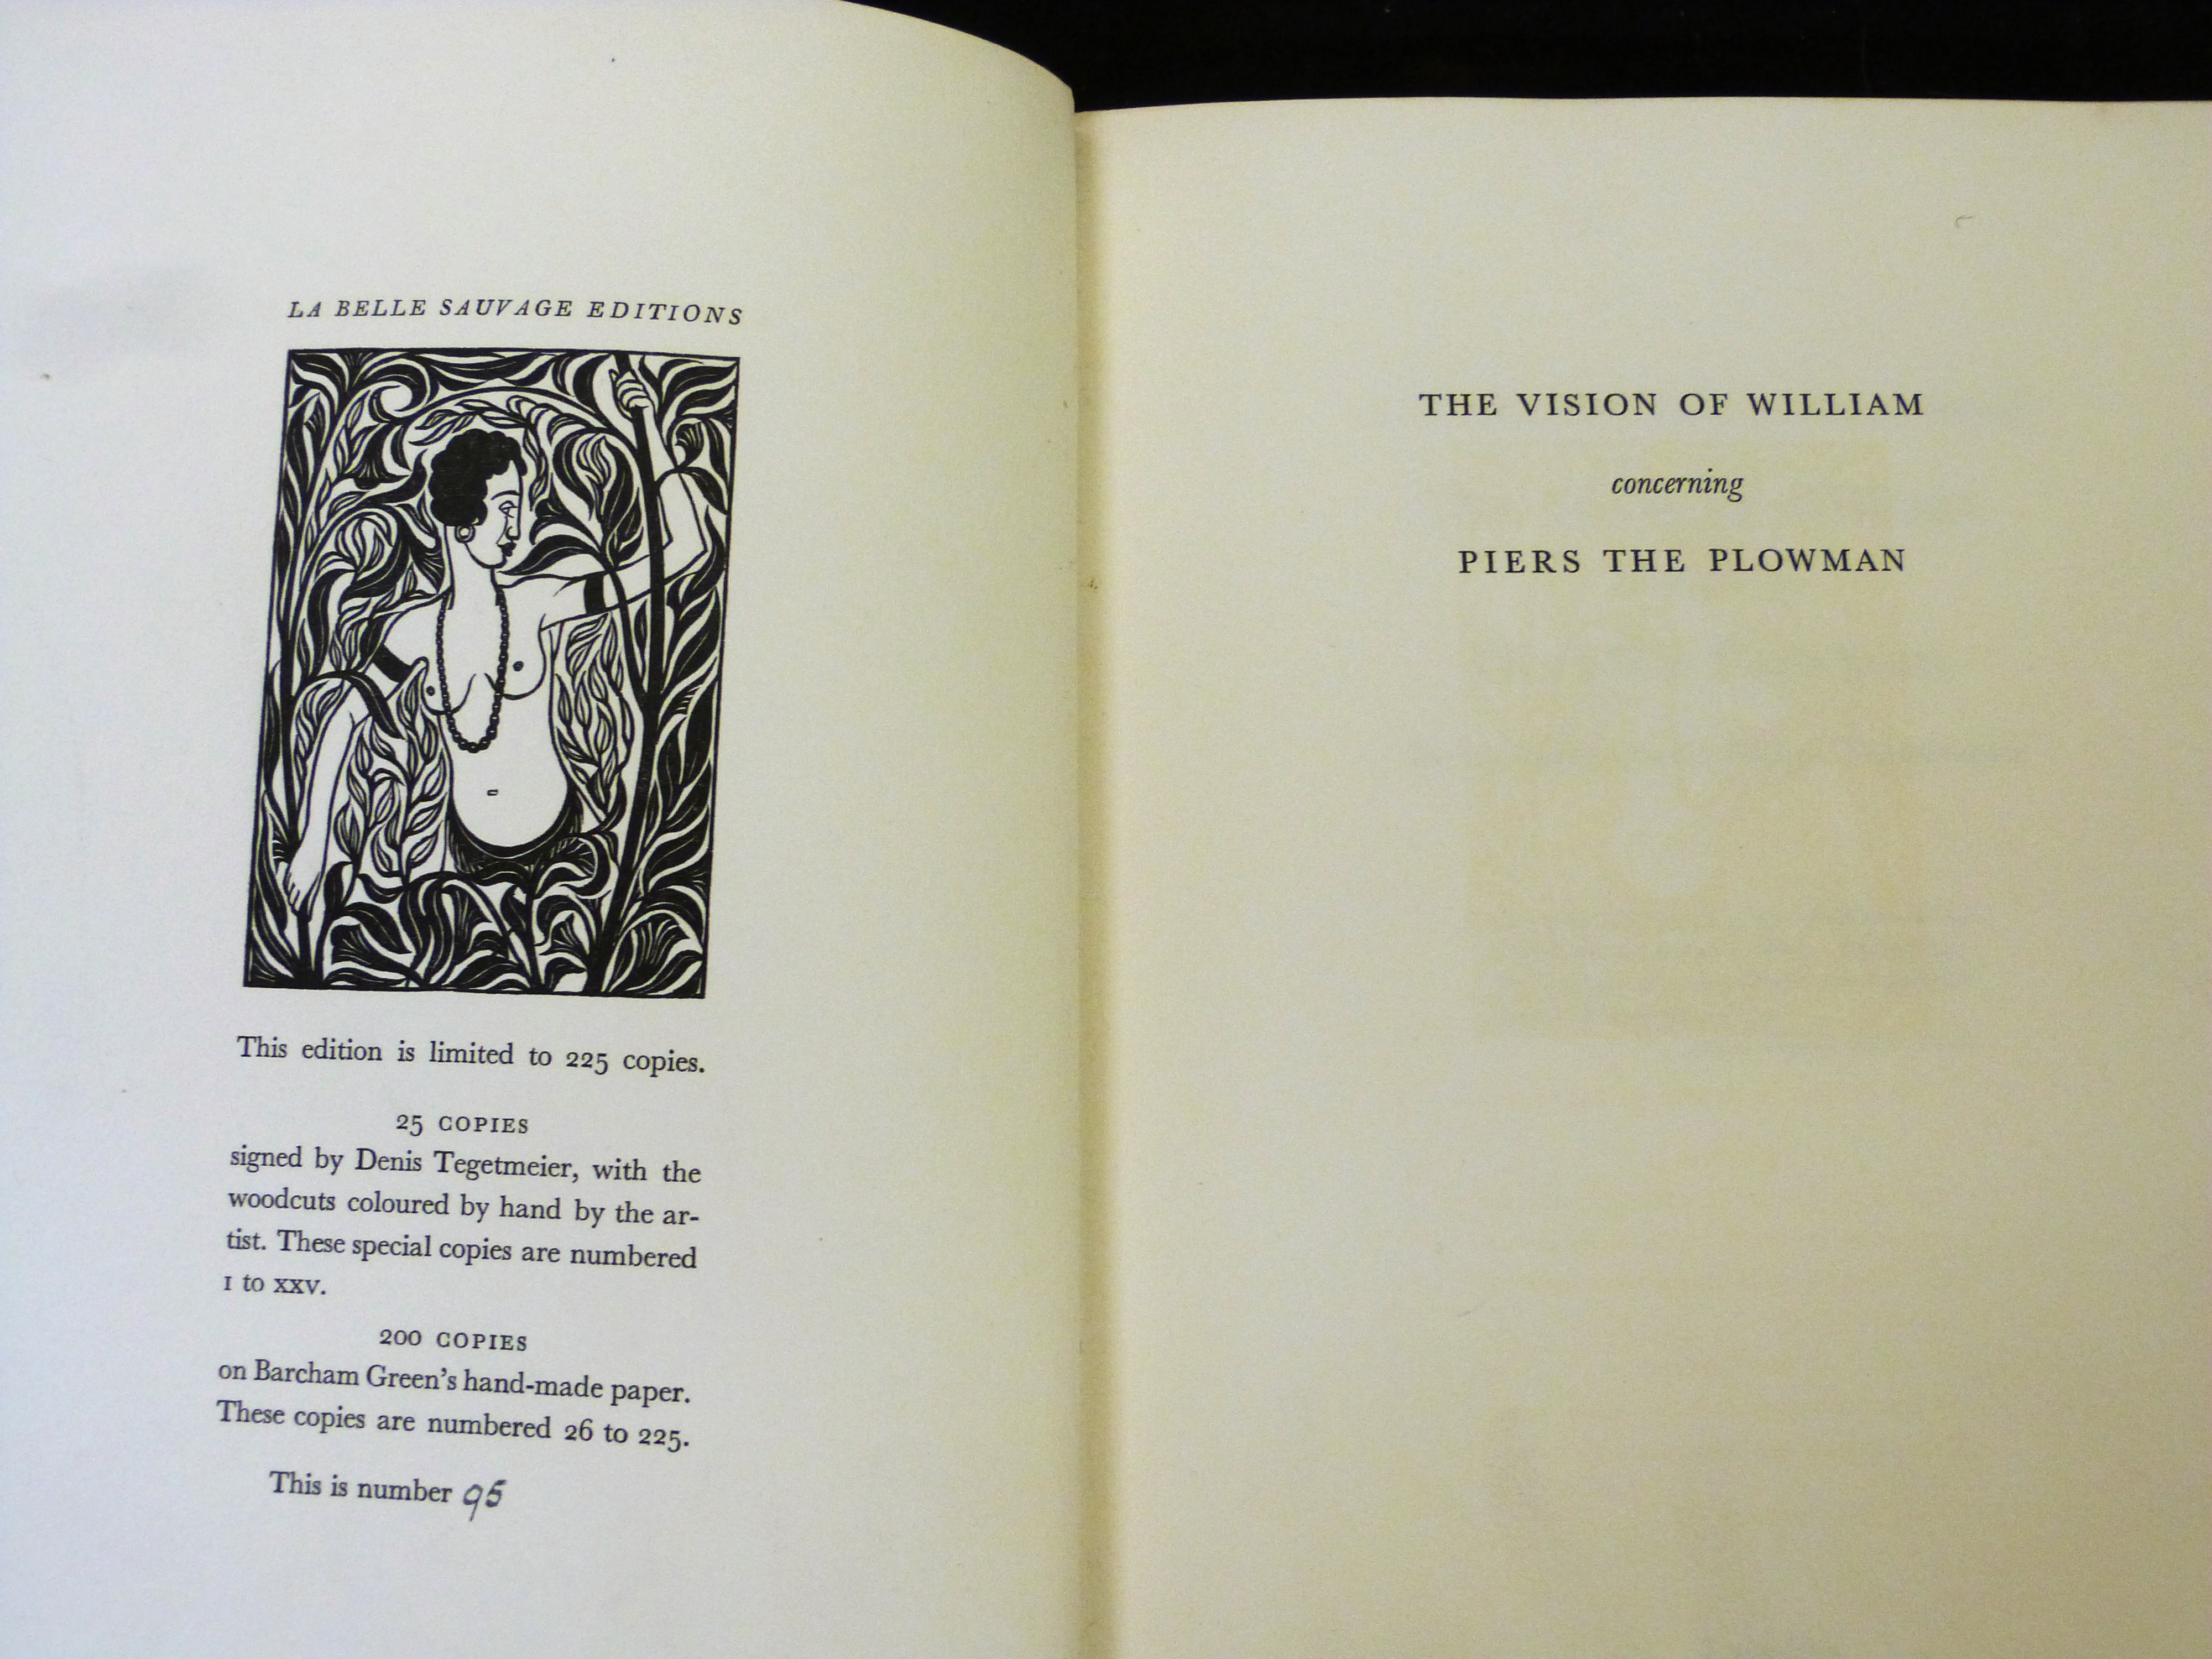 WILLIAM LANGLAND: A VERSION BY DONALD ATTWATER OF THE VISION OF WILLIAM CONCERNING PIERS THE